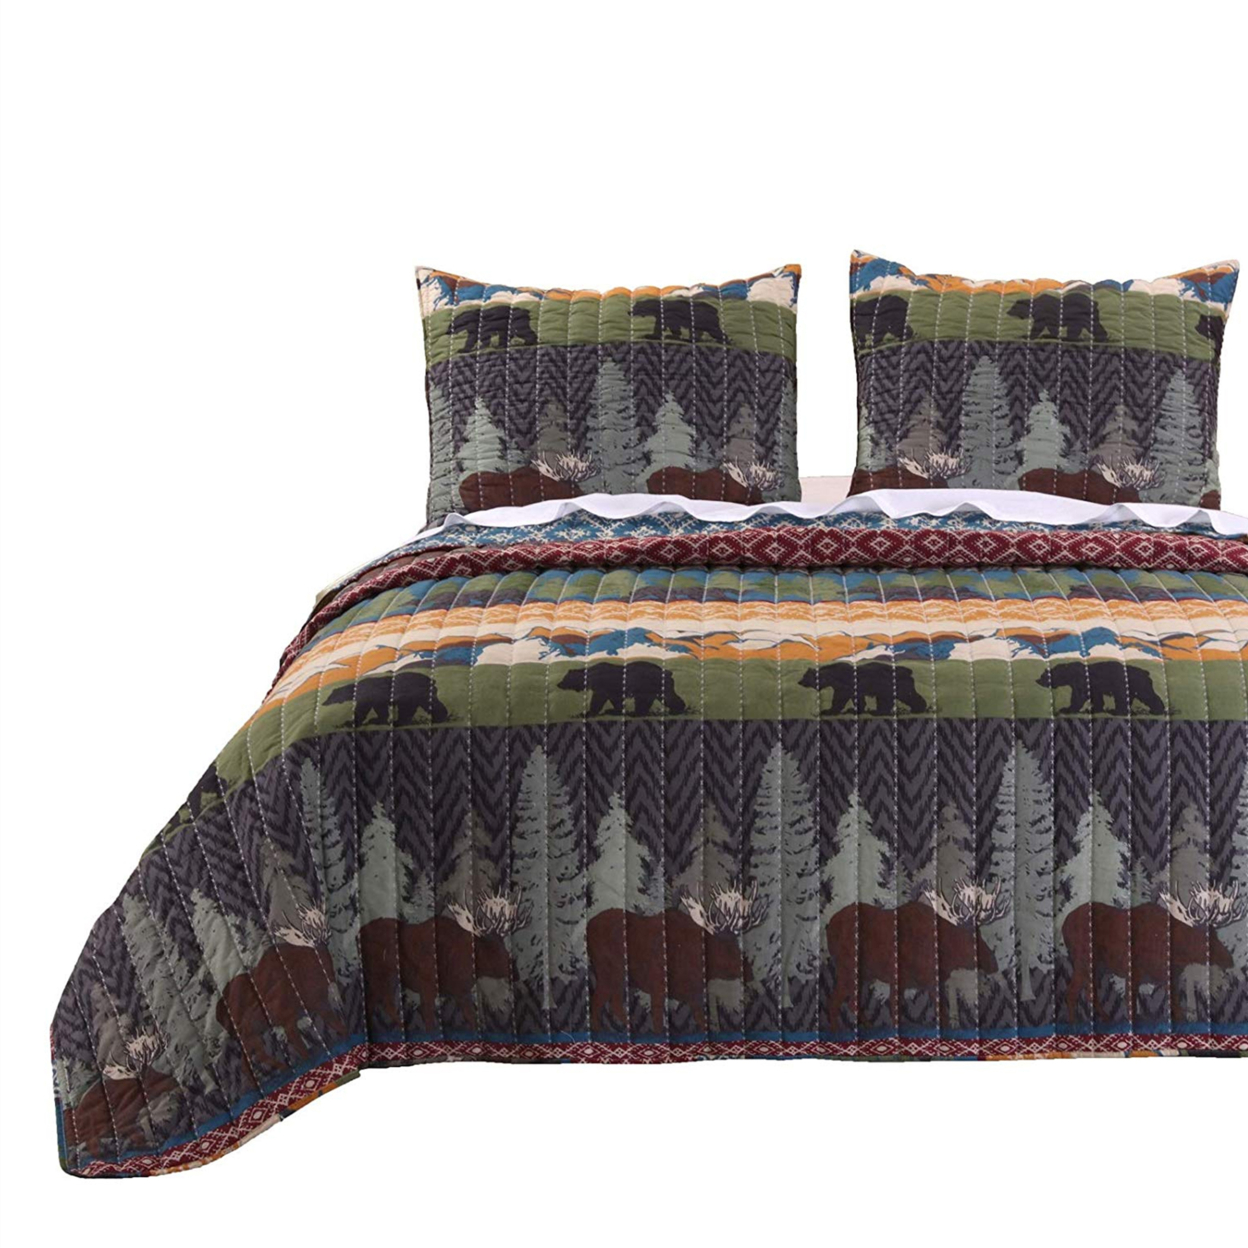 3 Piece King Size Quilt Set With Nature Inspired Print, Multicolor- Saltoro Sherpi